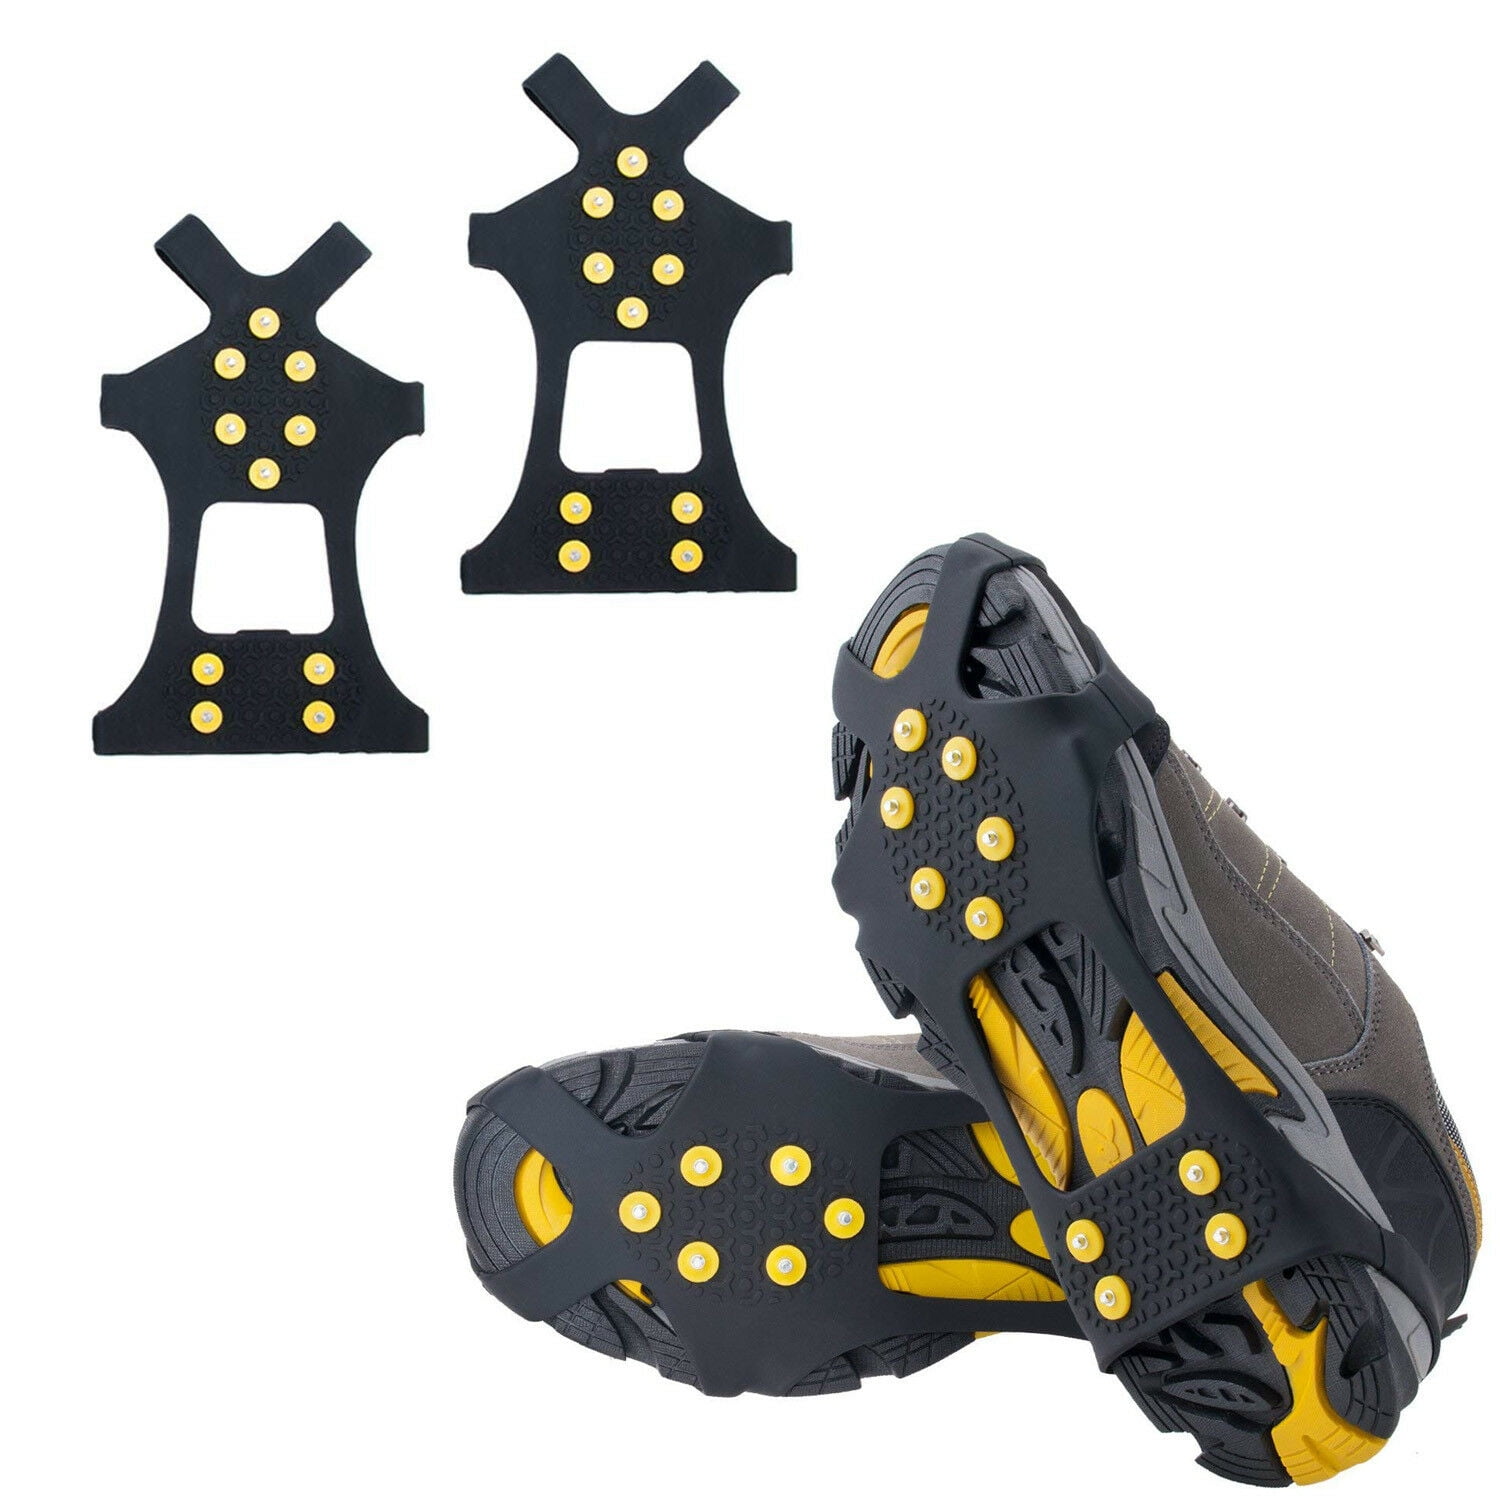 Ice Snow Crampon Cleats Anti Slip Walk Spikes Grips Grippers For Boot Over Shoe 